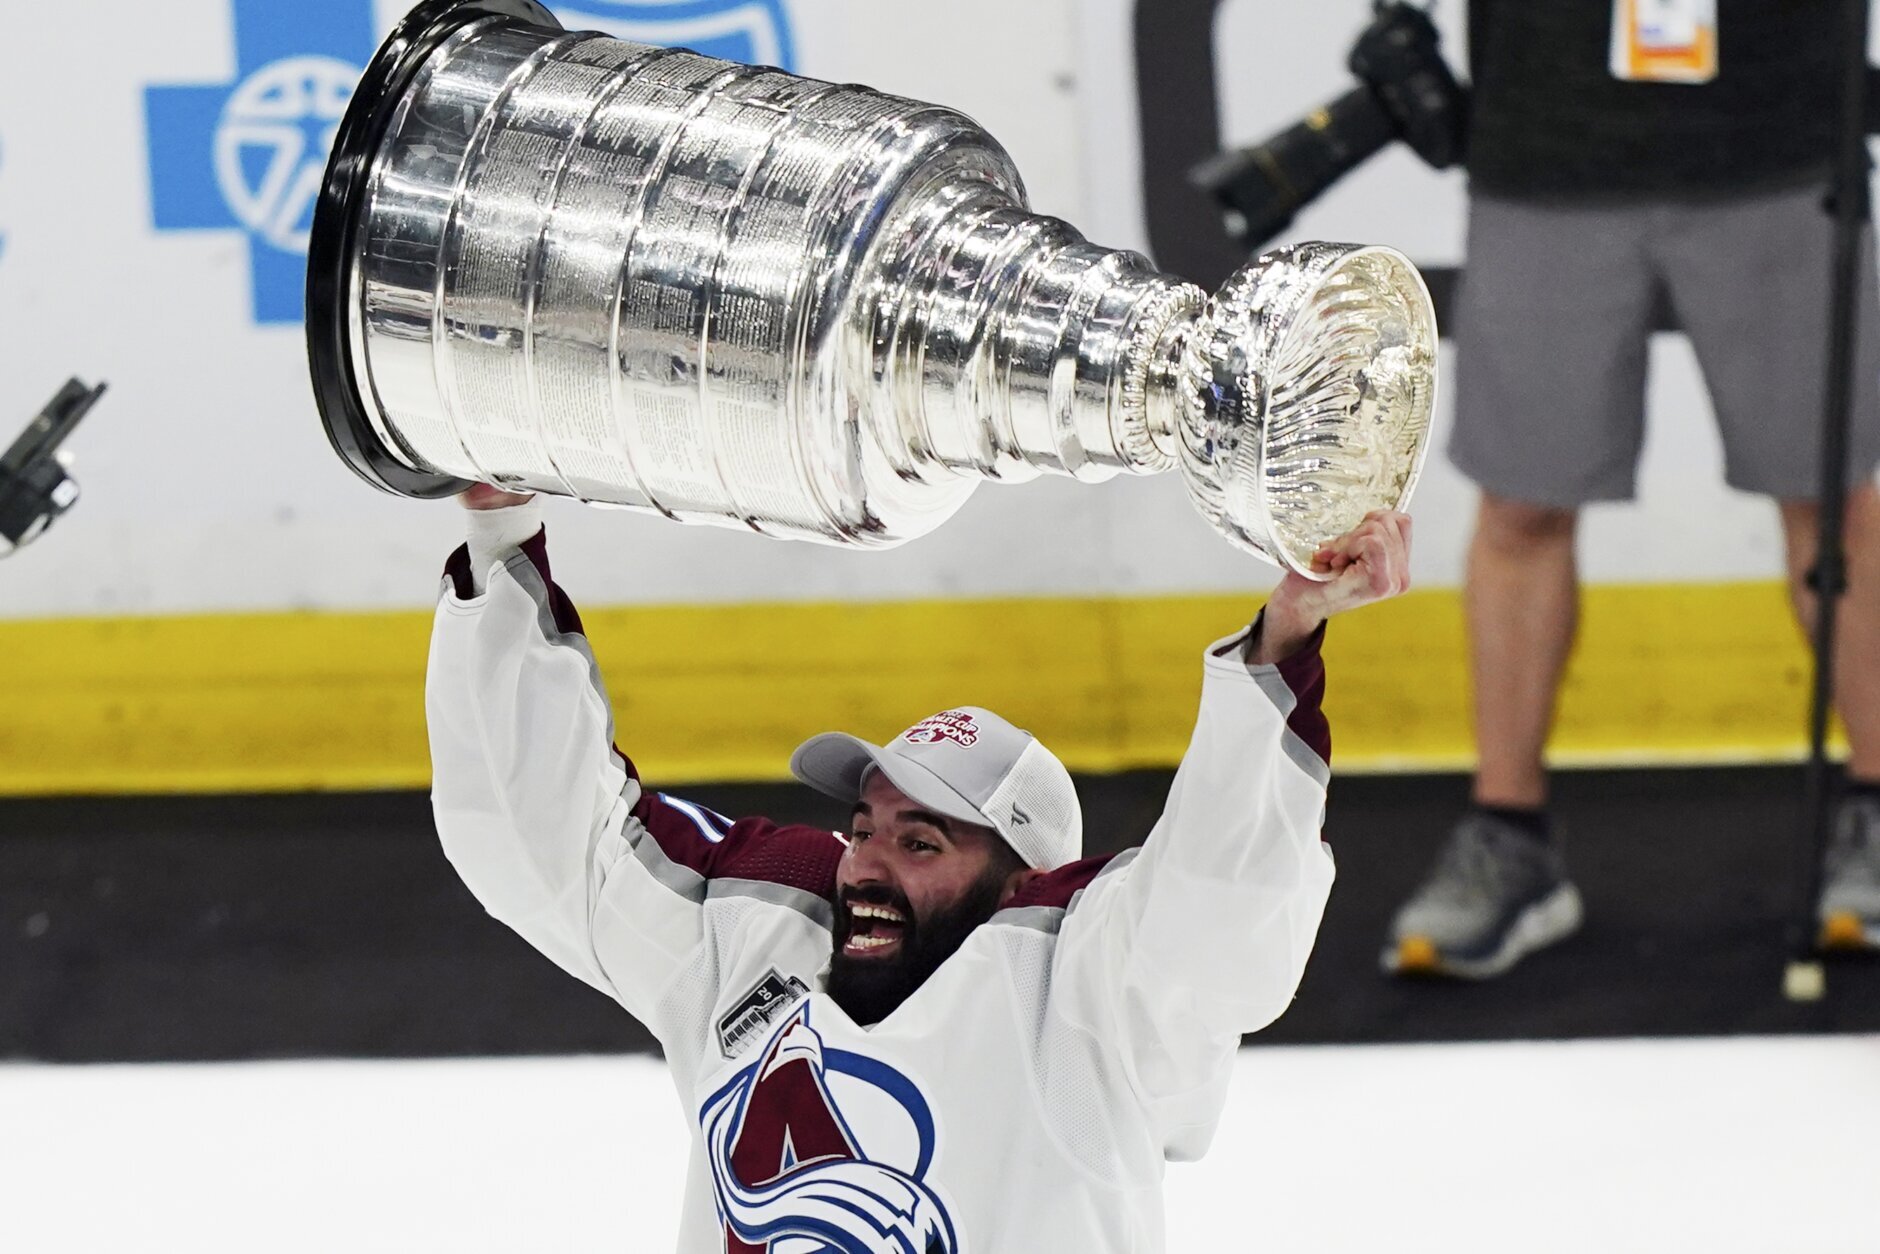 Avalanche dethrone Lightning to win Stanley Cup for 3rd time - Chicago  Sun-Times